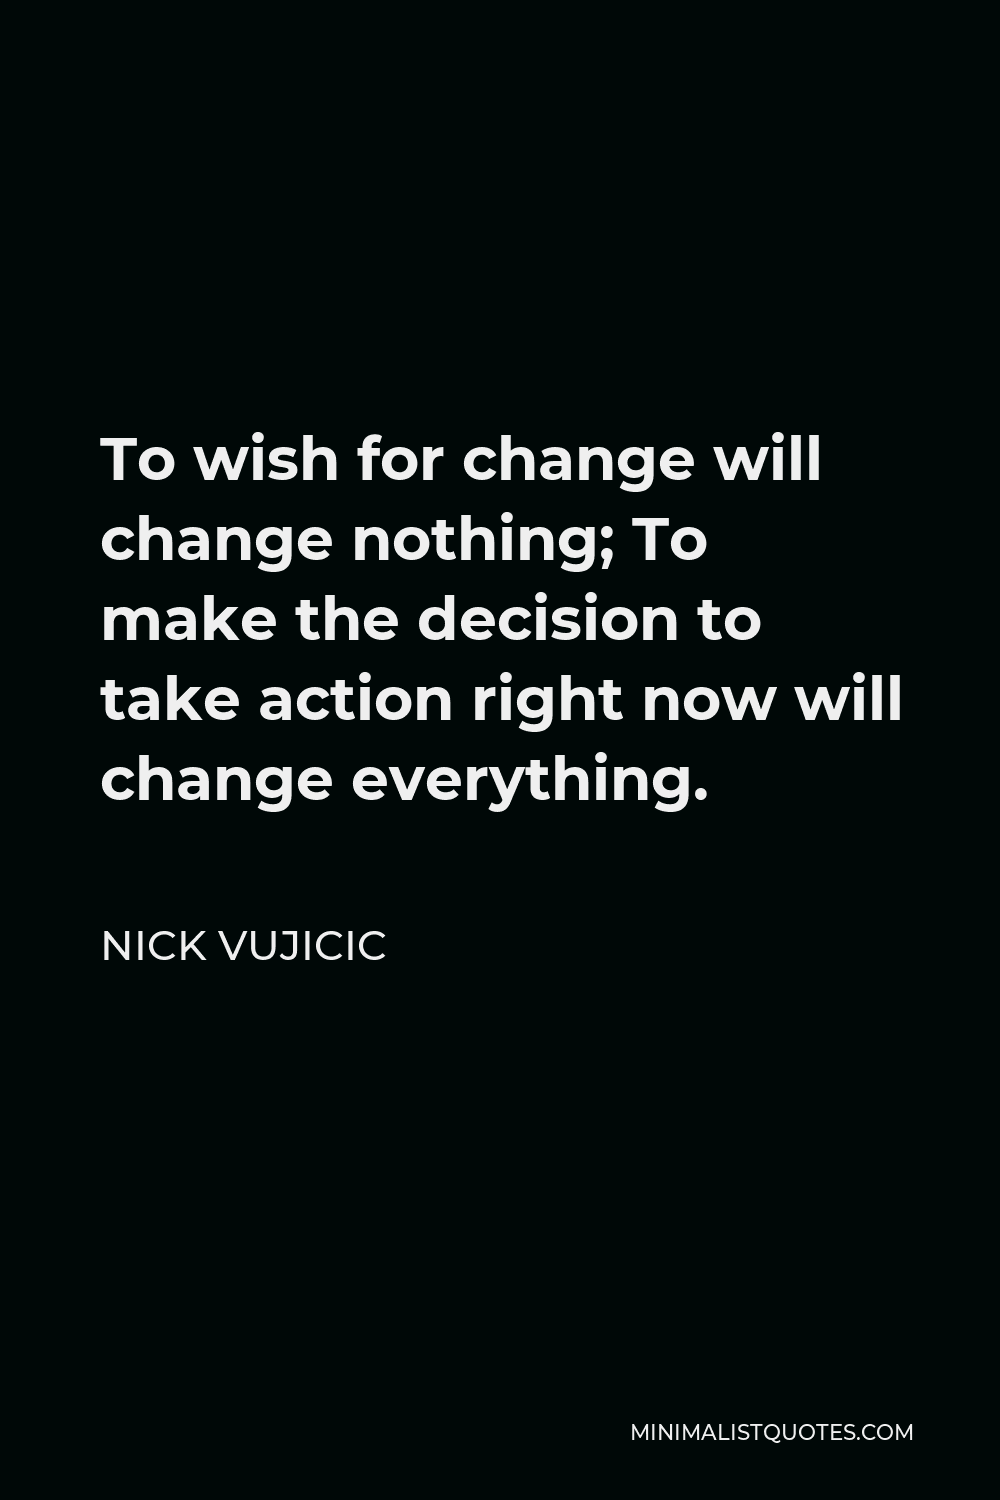 Nick Vujicic Quote - To wish for change will change nothing; To make the decision to take action right now will change everything.